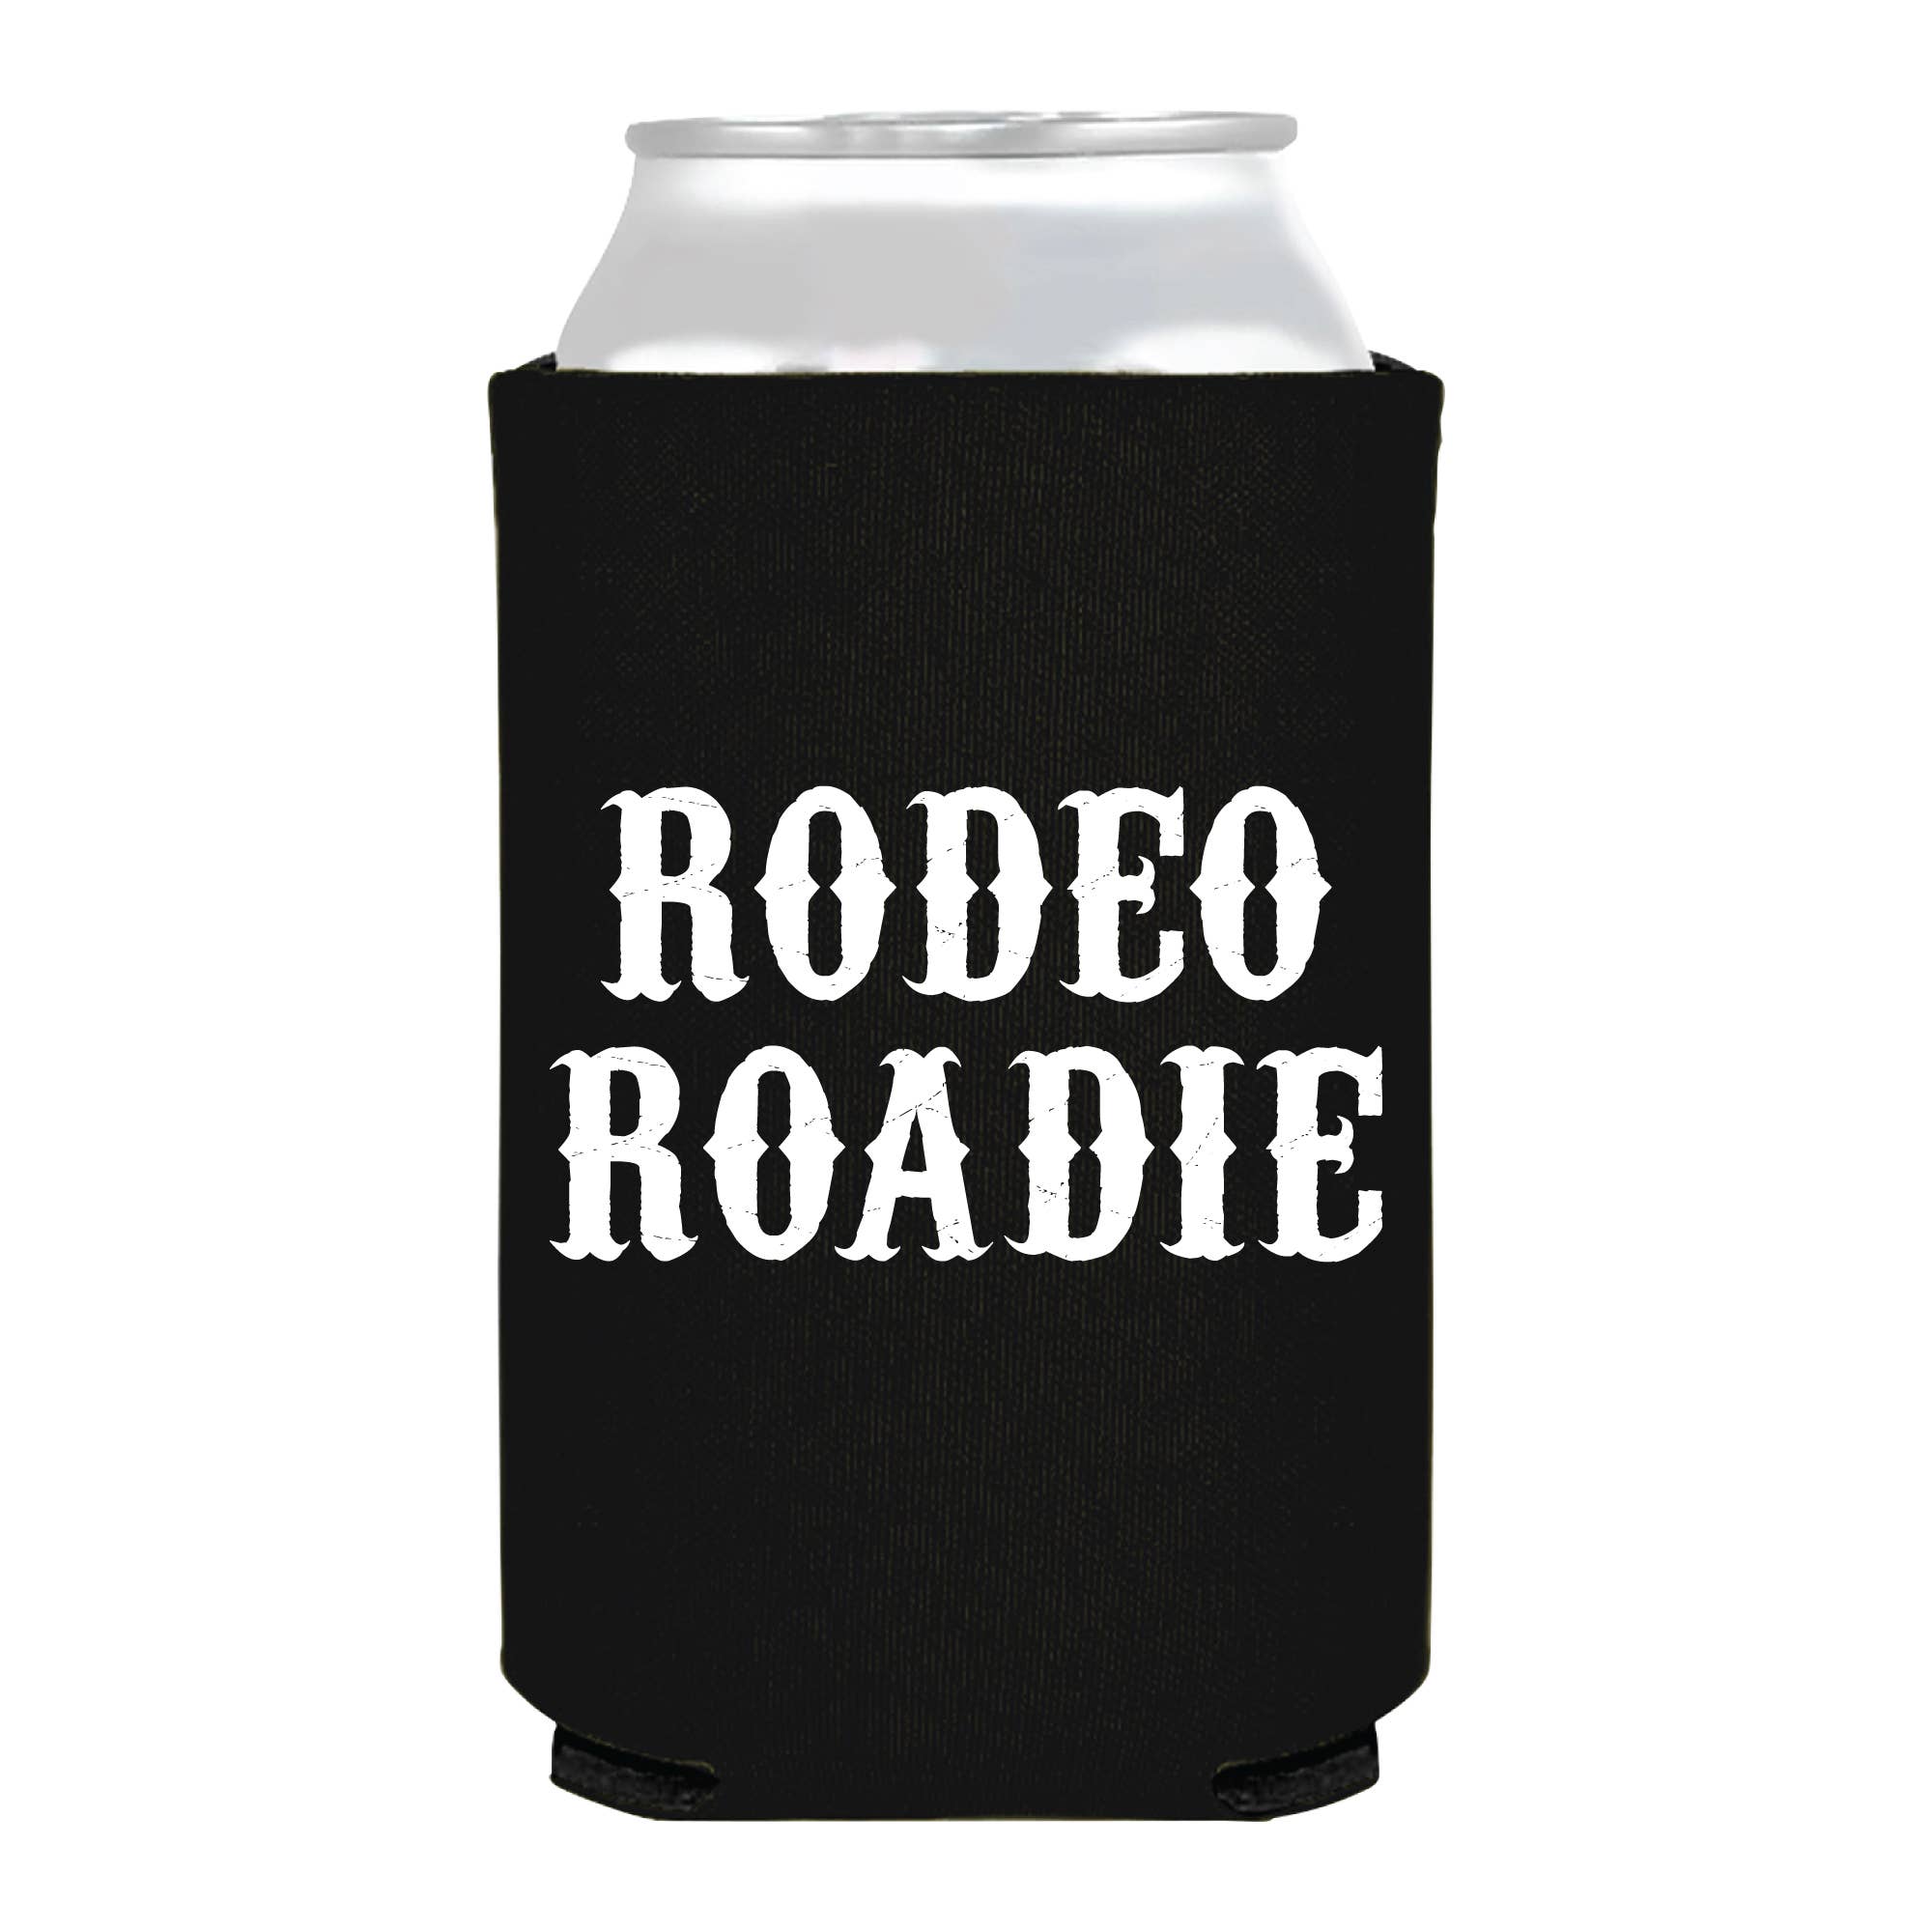 RODEO ROADIE Can Cooler